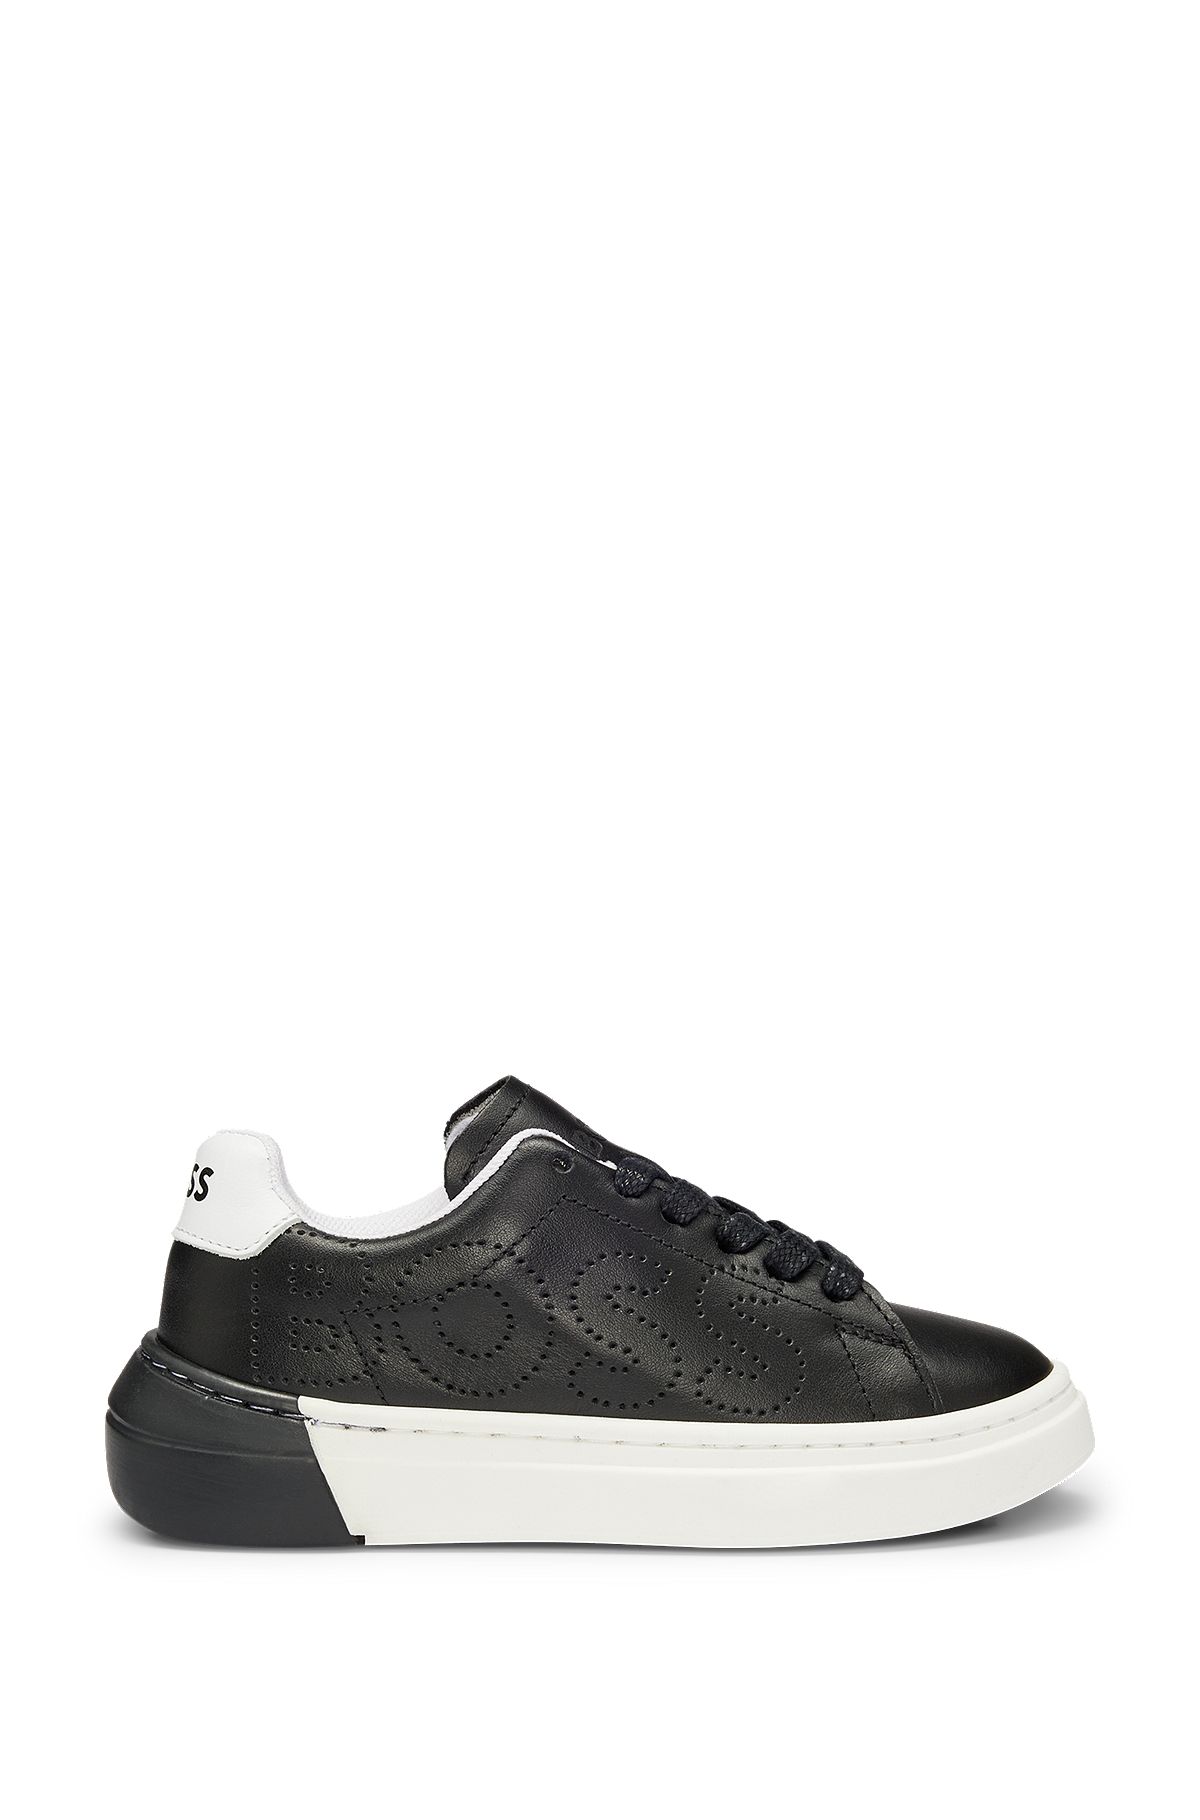 Kids' trainers in leather with logo details, Black